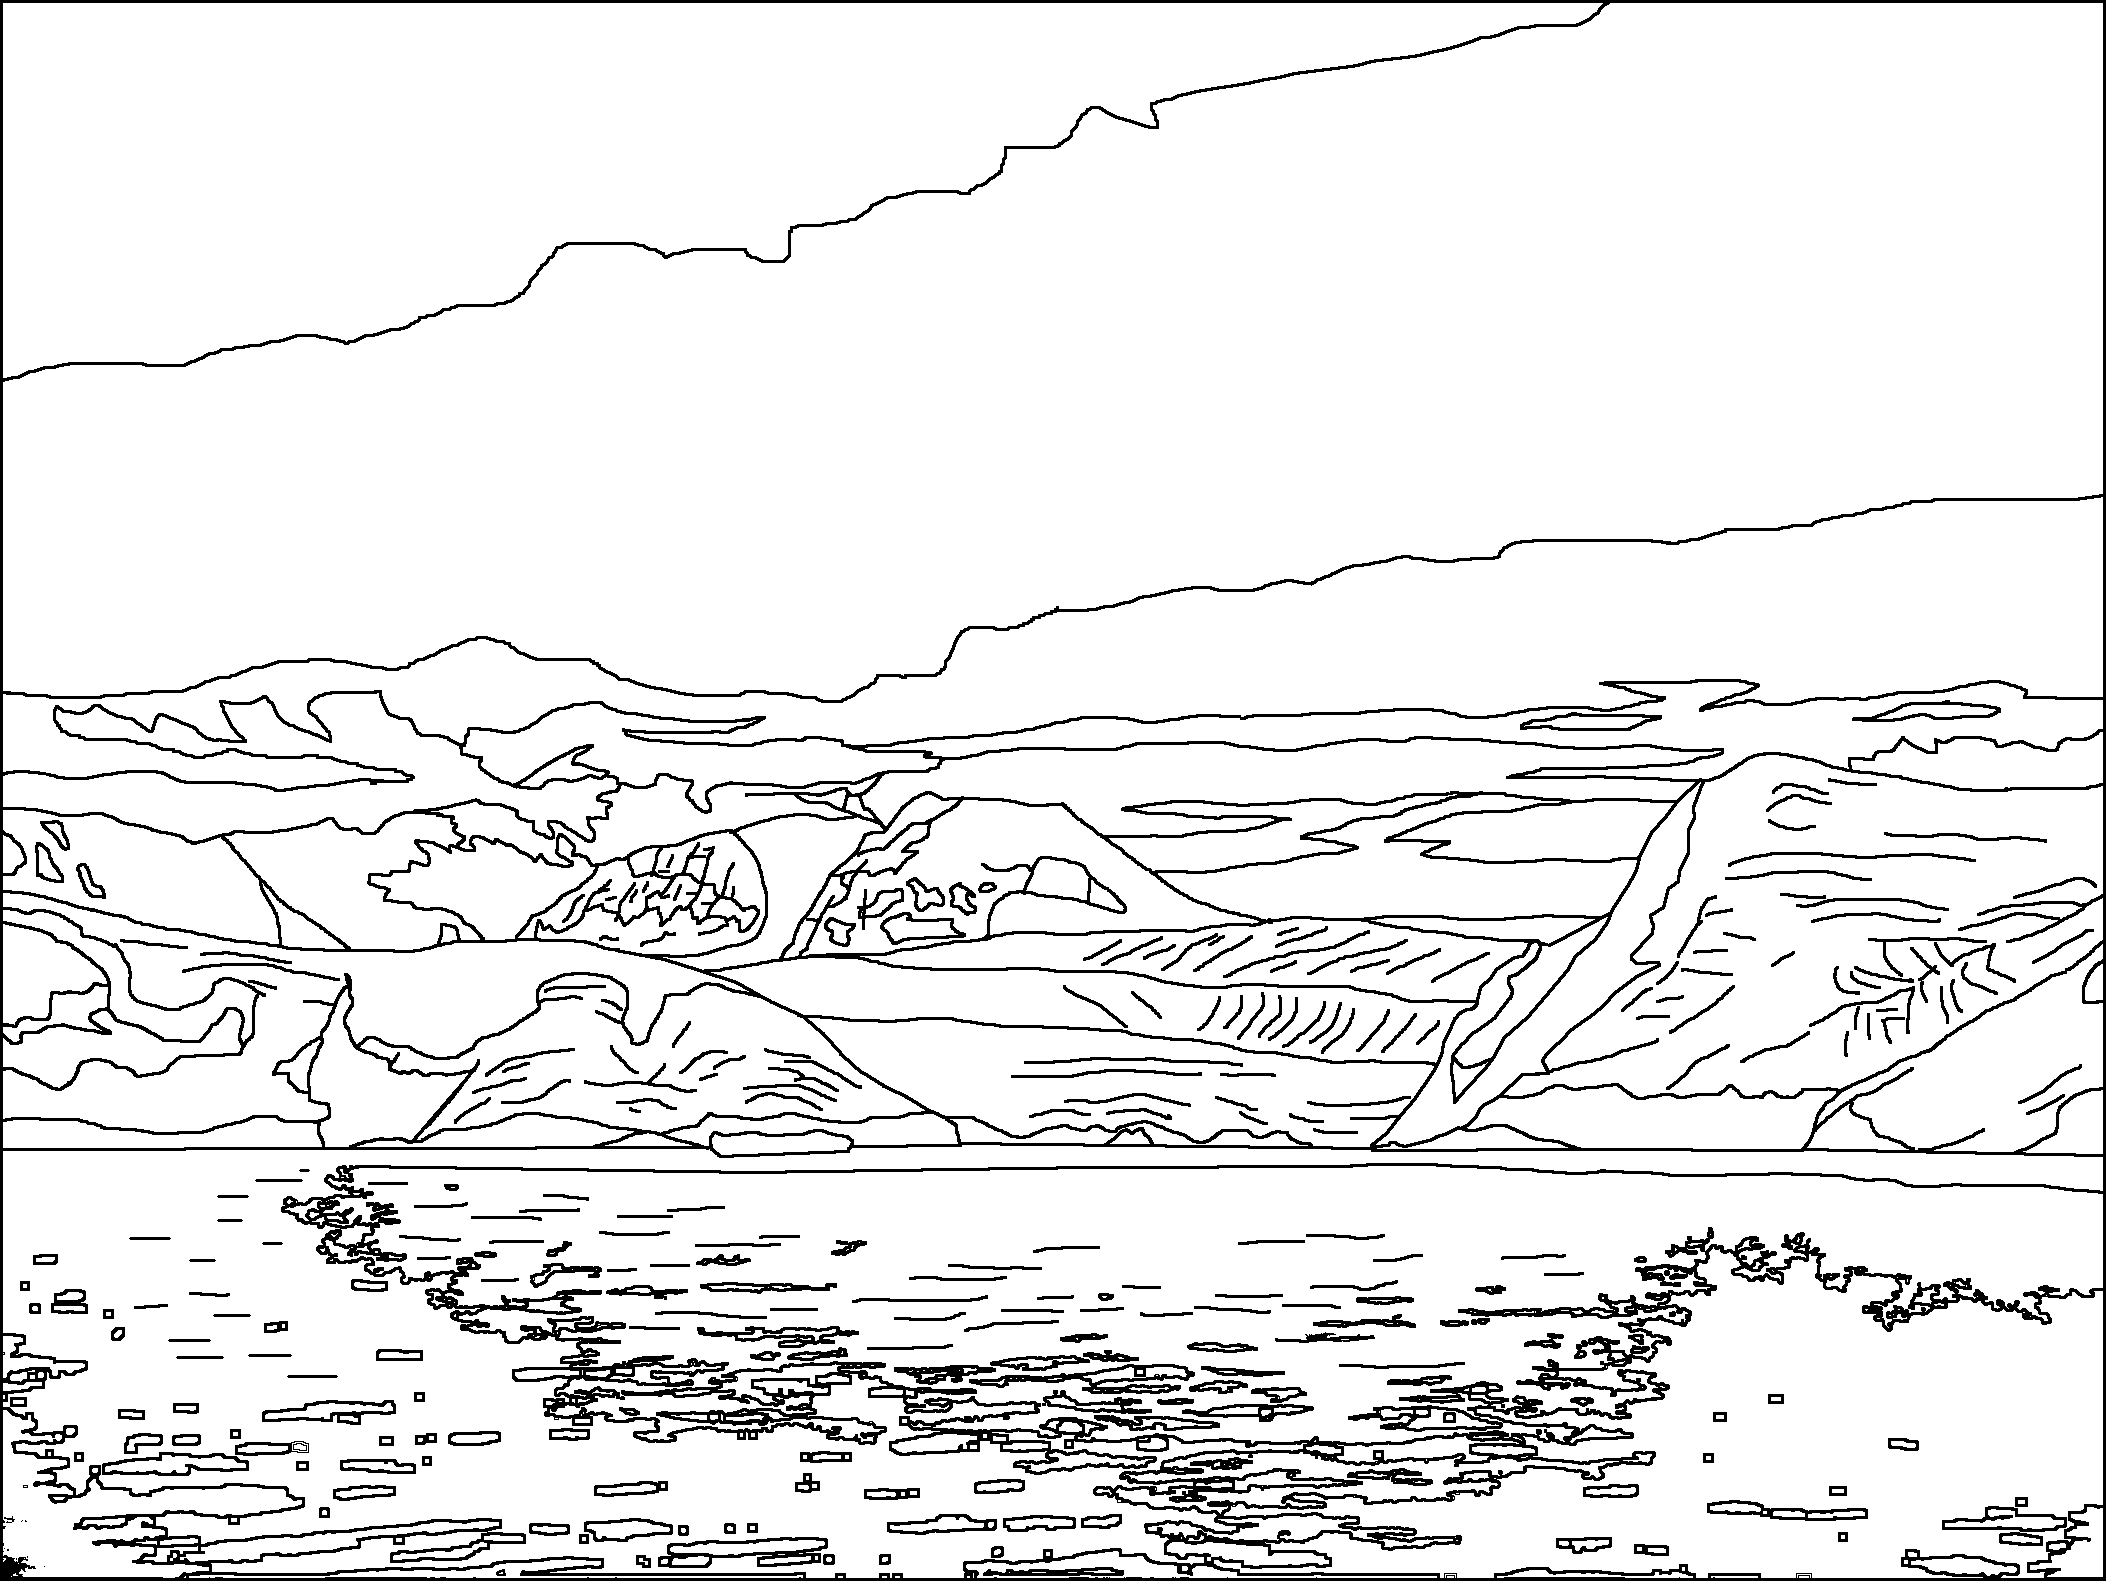 antarctica coloring pages antarctica coloring pages to download and print for free pages coloring antarctica 